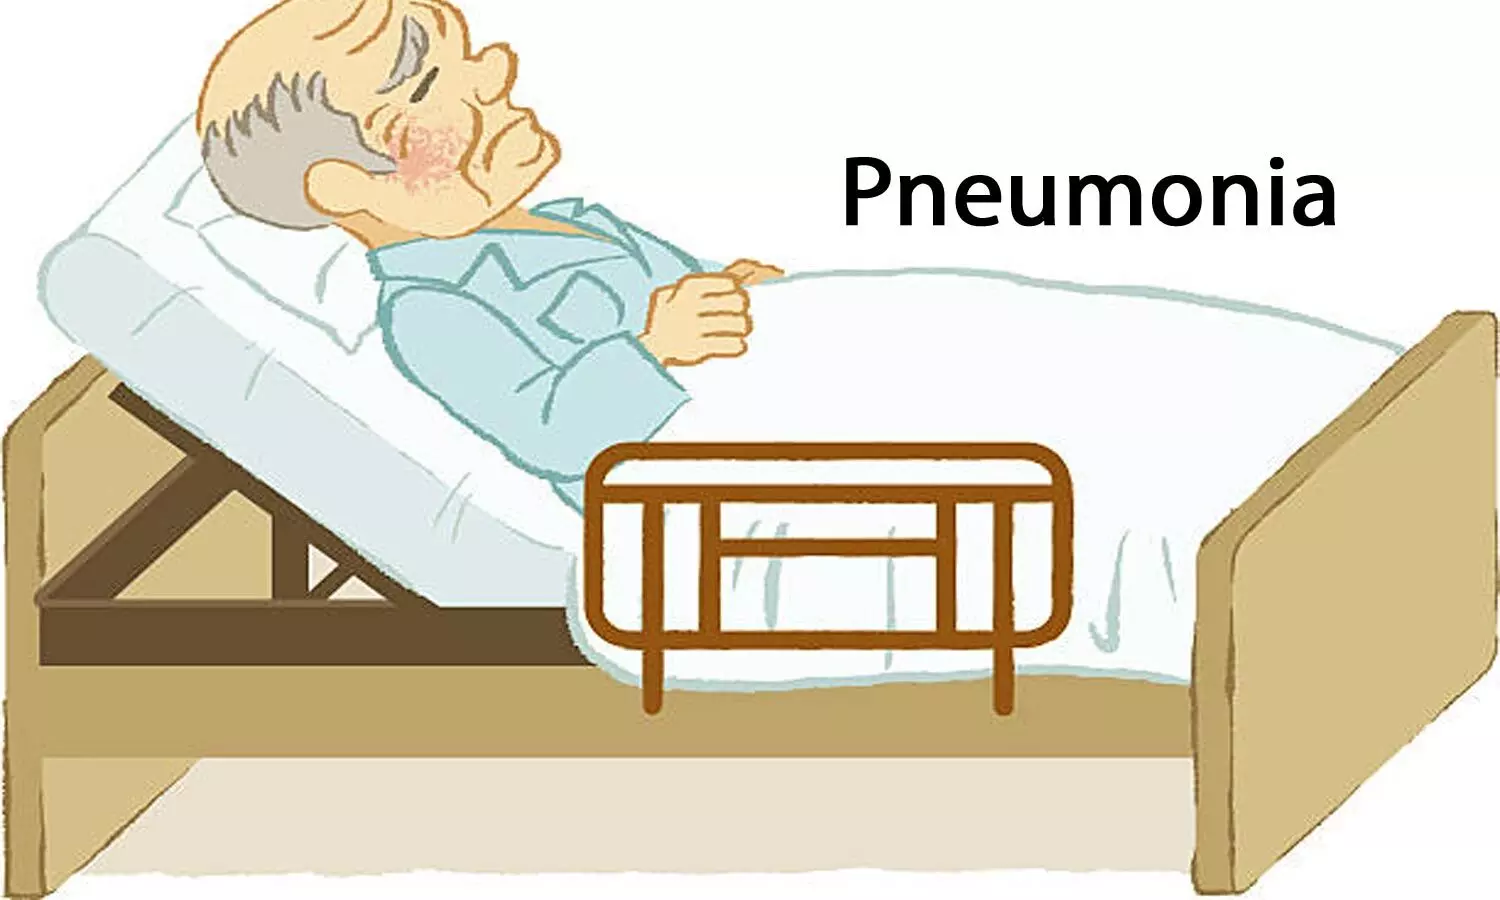 Simple diagnostic model may accurately predict pneumonia risk in kids without an X ray